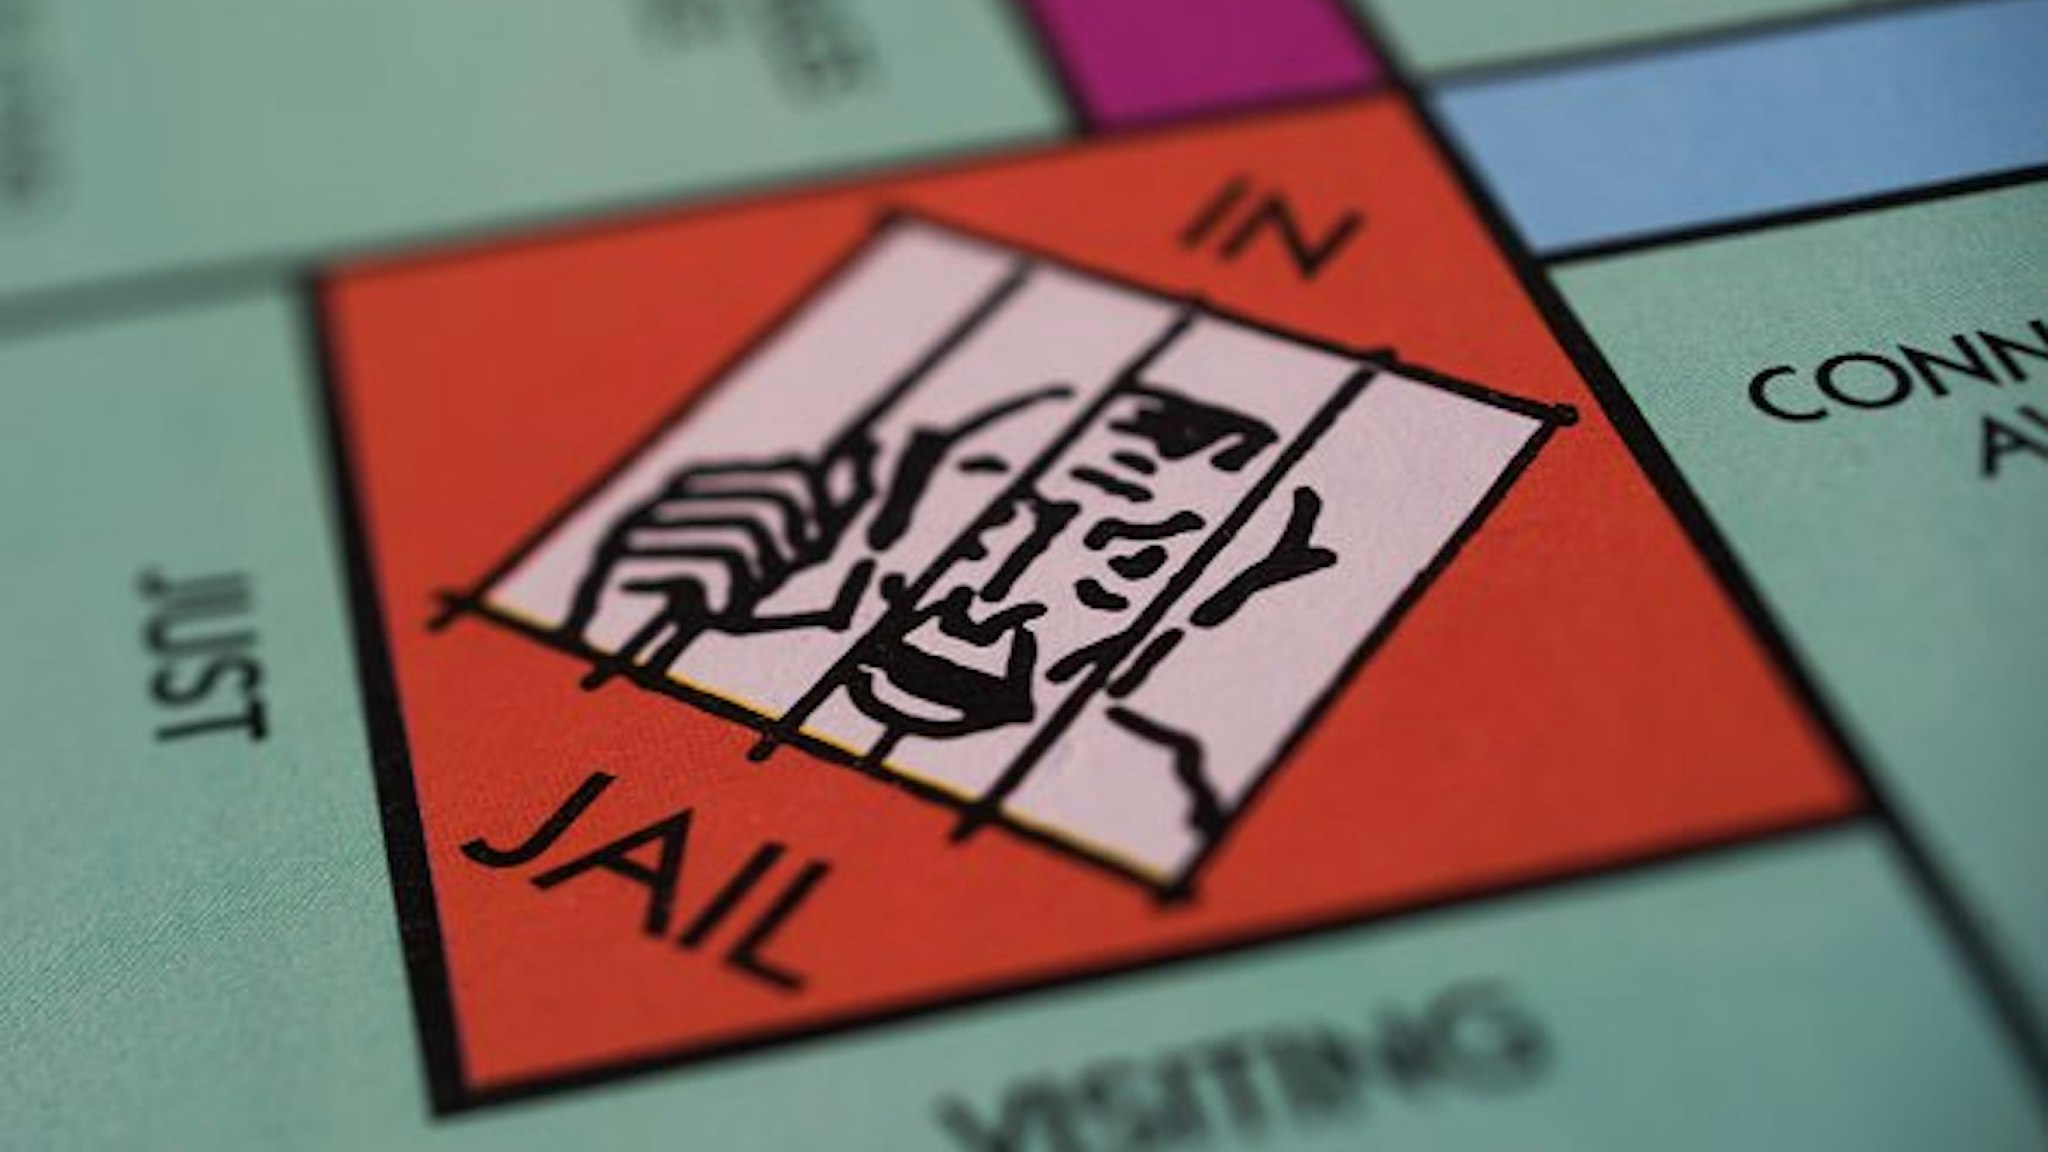 The "Jail" square is seen on a Hasbro Inc. Monopoly board game arranged for a photograph taken with a tilt-shift lens in Oradell, New Jersey, U.S., on Sunday, June 28, 2015.